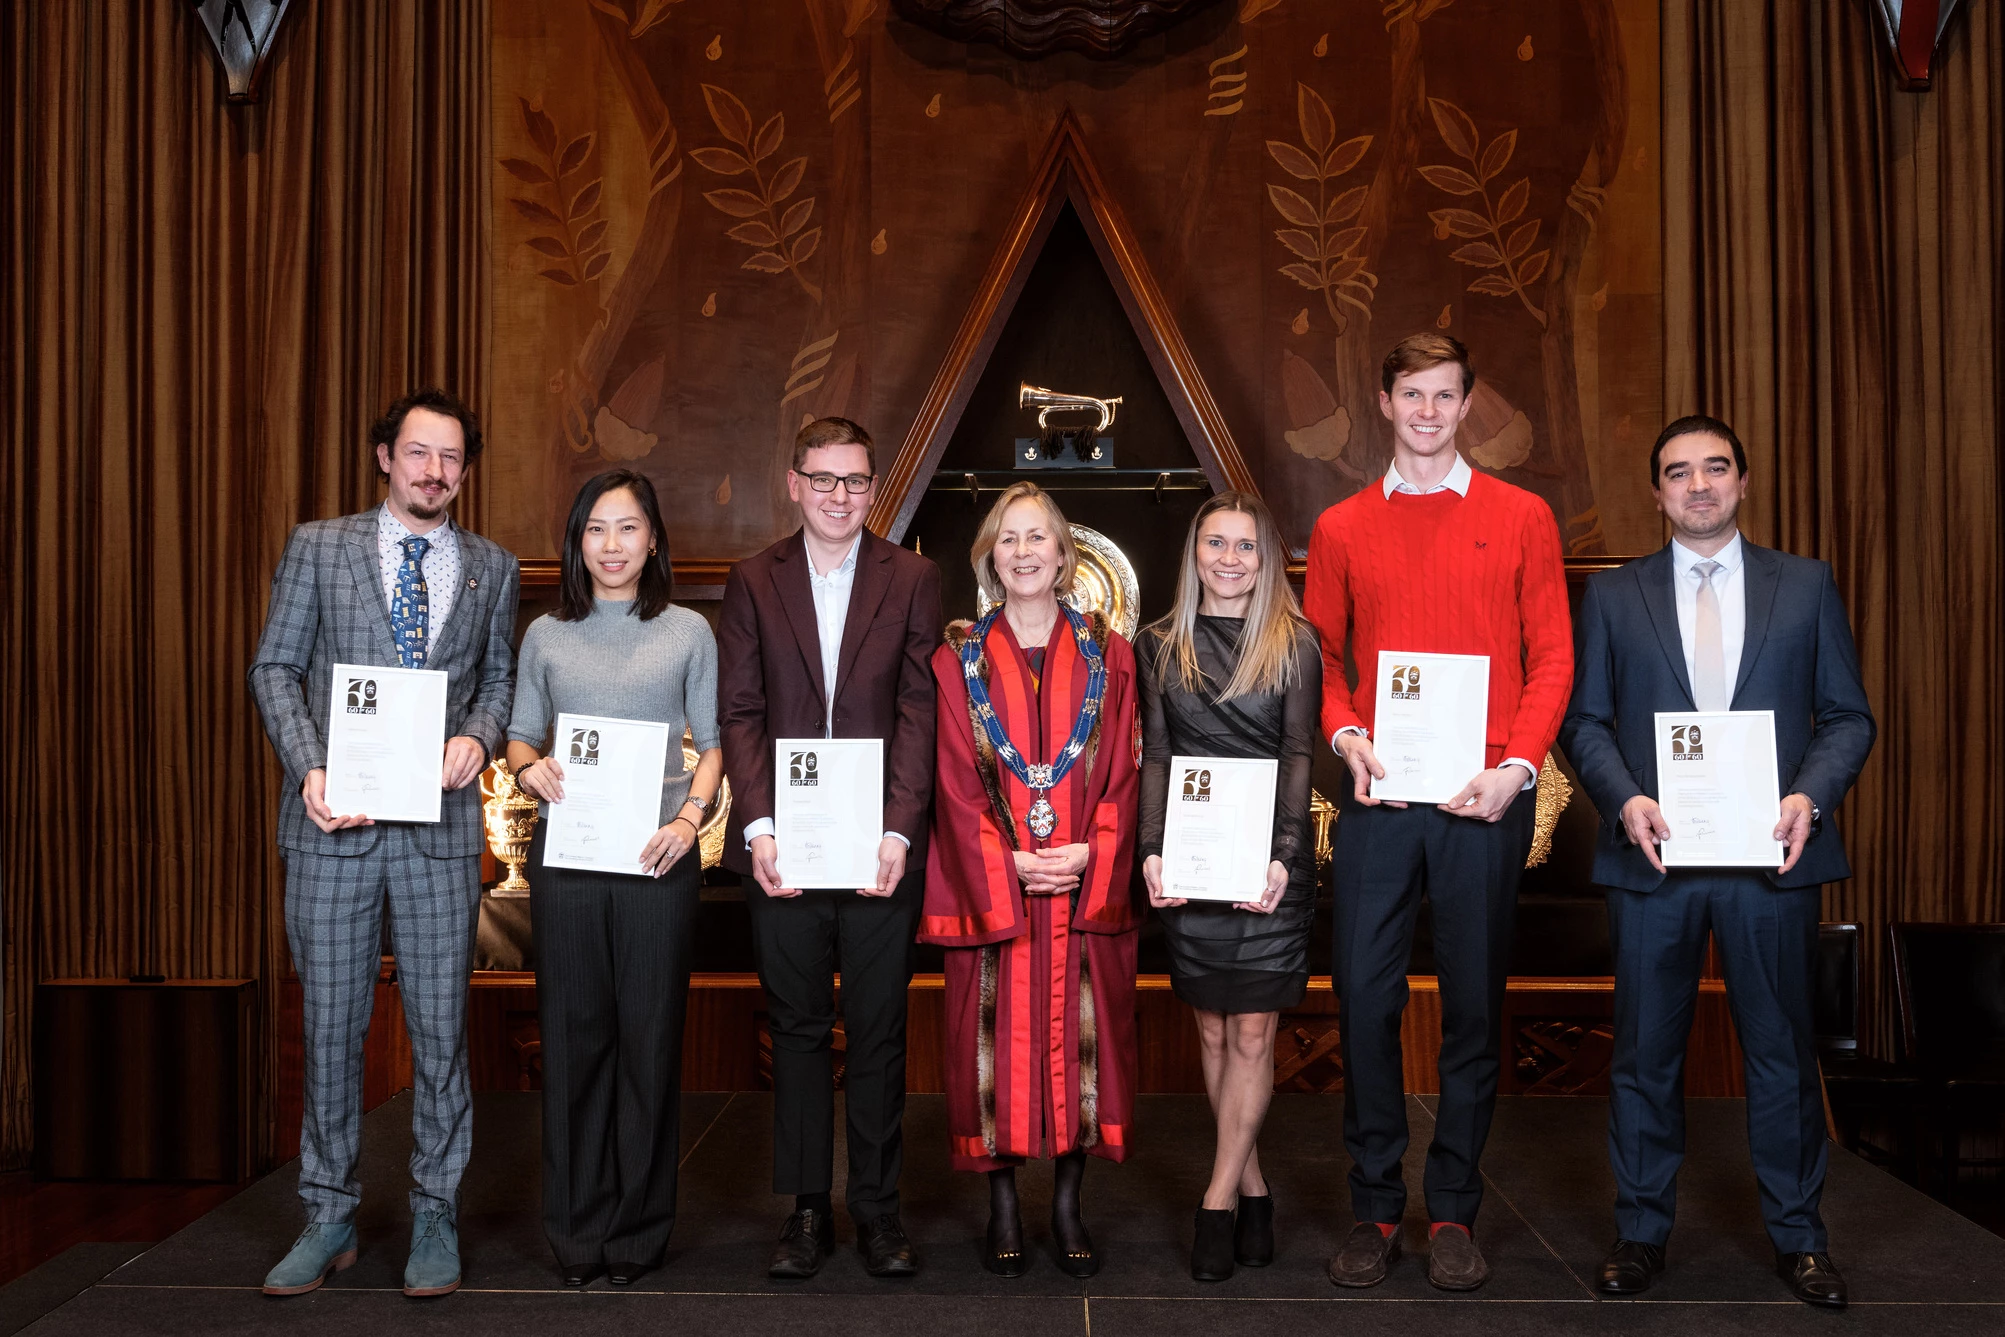 Amanda Waring, Master of the Furniture Makers’ Company, with some of the winners of the Furniture Makers’ Company’s ‘60 for 60’ in London